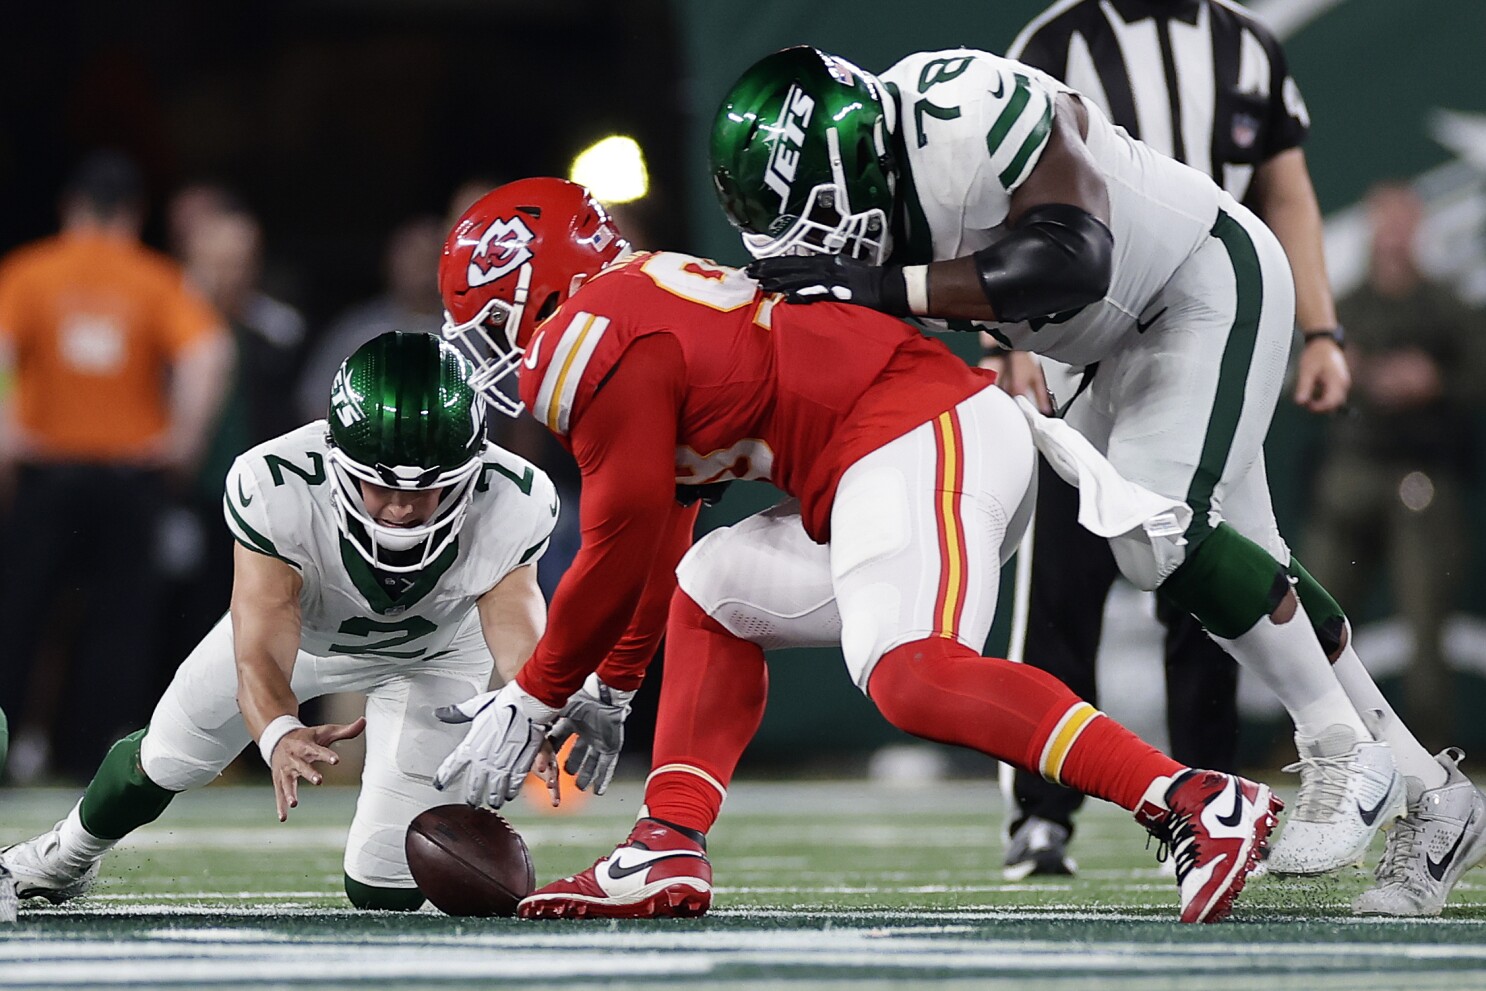 Jets not happy with questionable penalty call that turned the game late in  23-20 loss to Chiefs